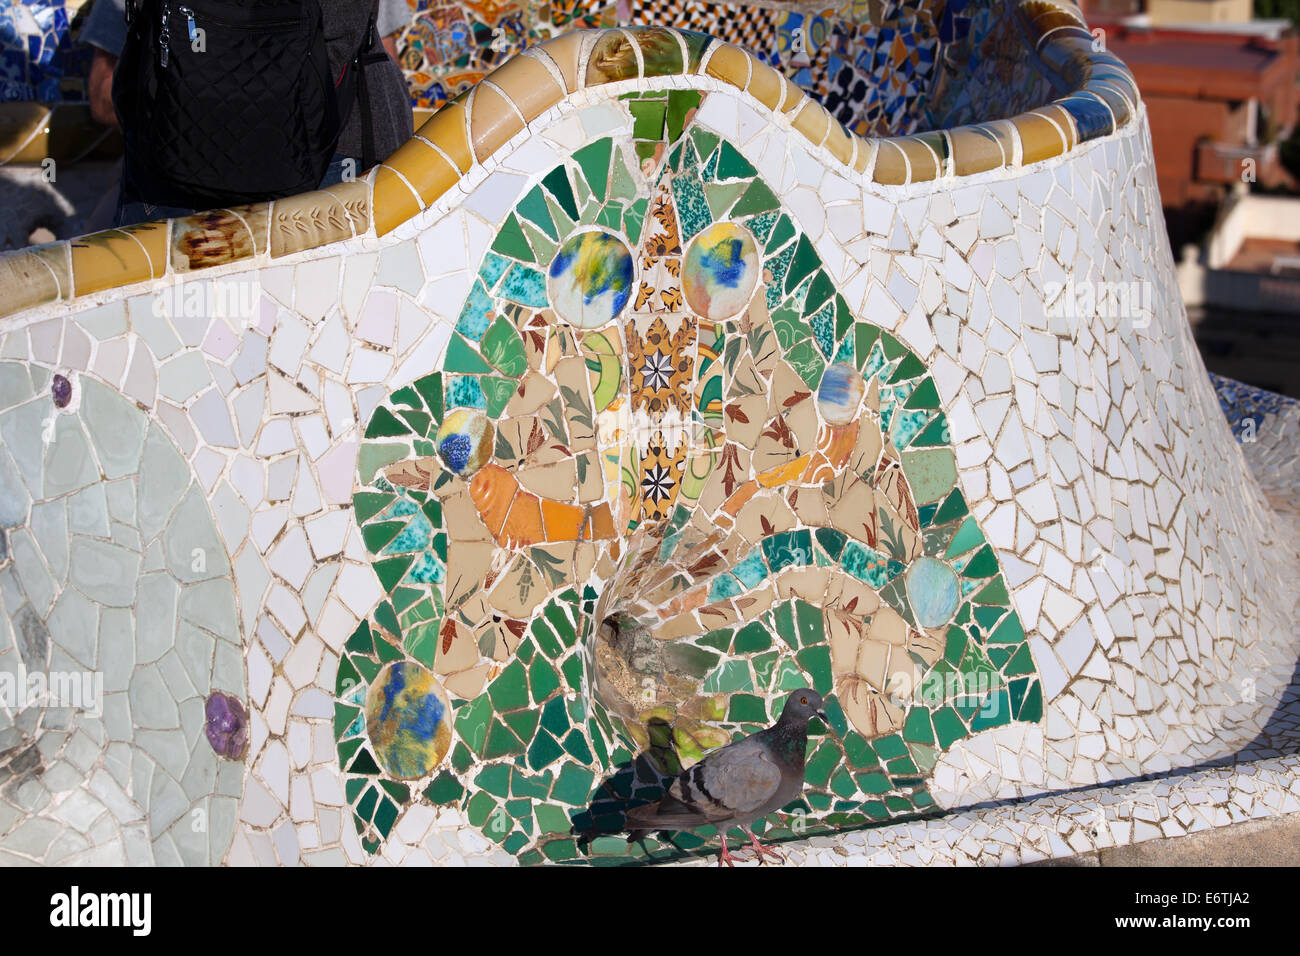 Trencadis broken tile shards abstract mosaic, part of Serpentine Bench at Gaudi's Park Guell in Barcelona, Catalonia, Spain. Stock Photo